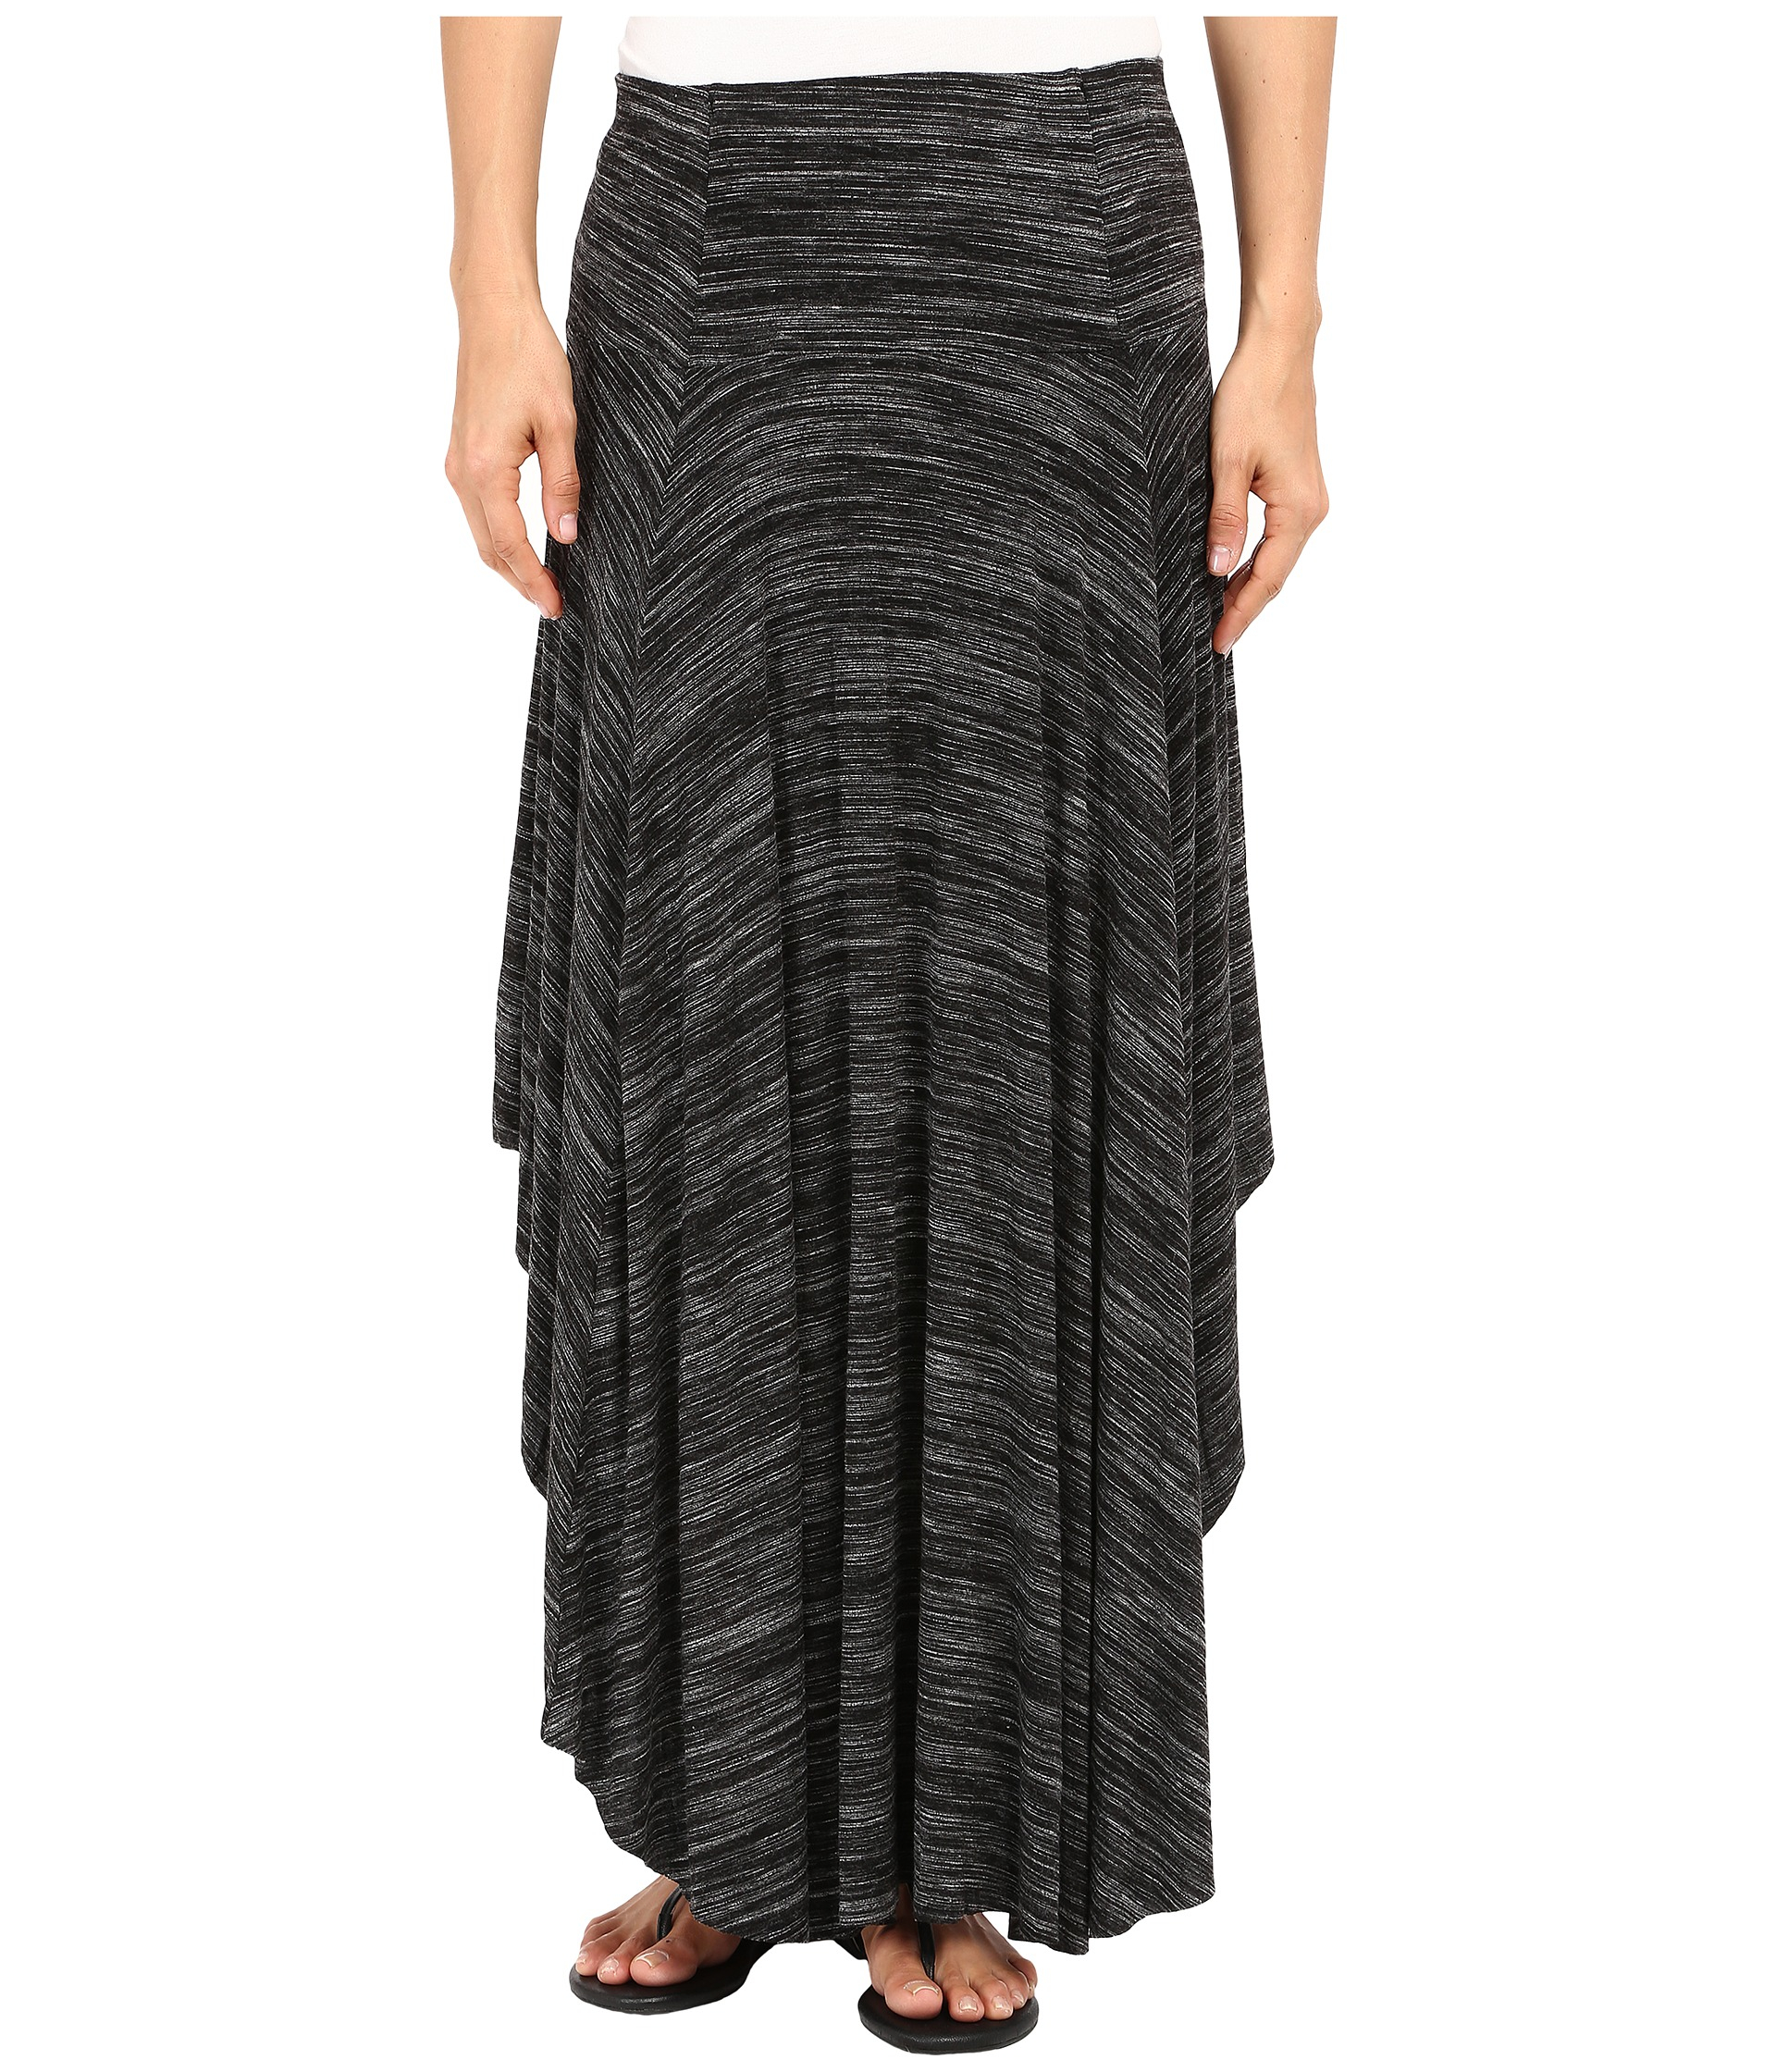 Mod-o-doc Space Dyed Rayon Spandex Jersey Round Midi Skirt in Black | Lyst